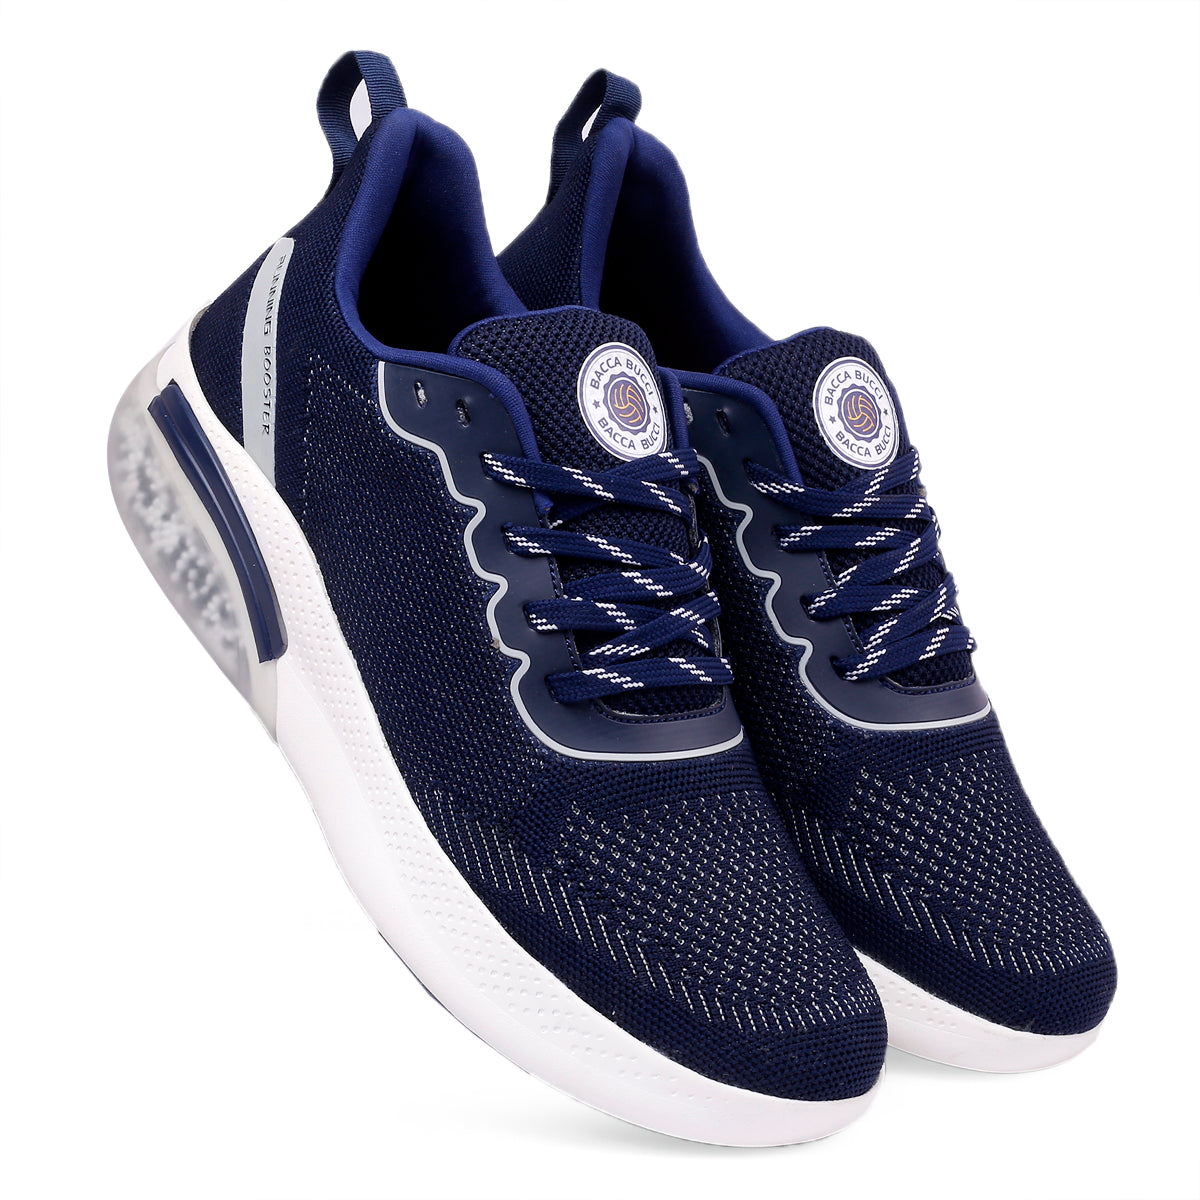 Bacca Bucci VIGOUR Comfortable Running Shoes with Adaptive Smart Cushioning 5 in 1 uni-Moulding Technology - Bacca Bucci